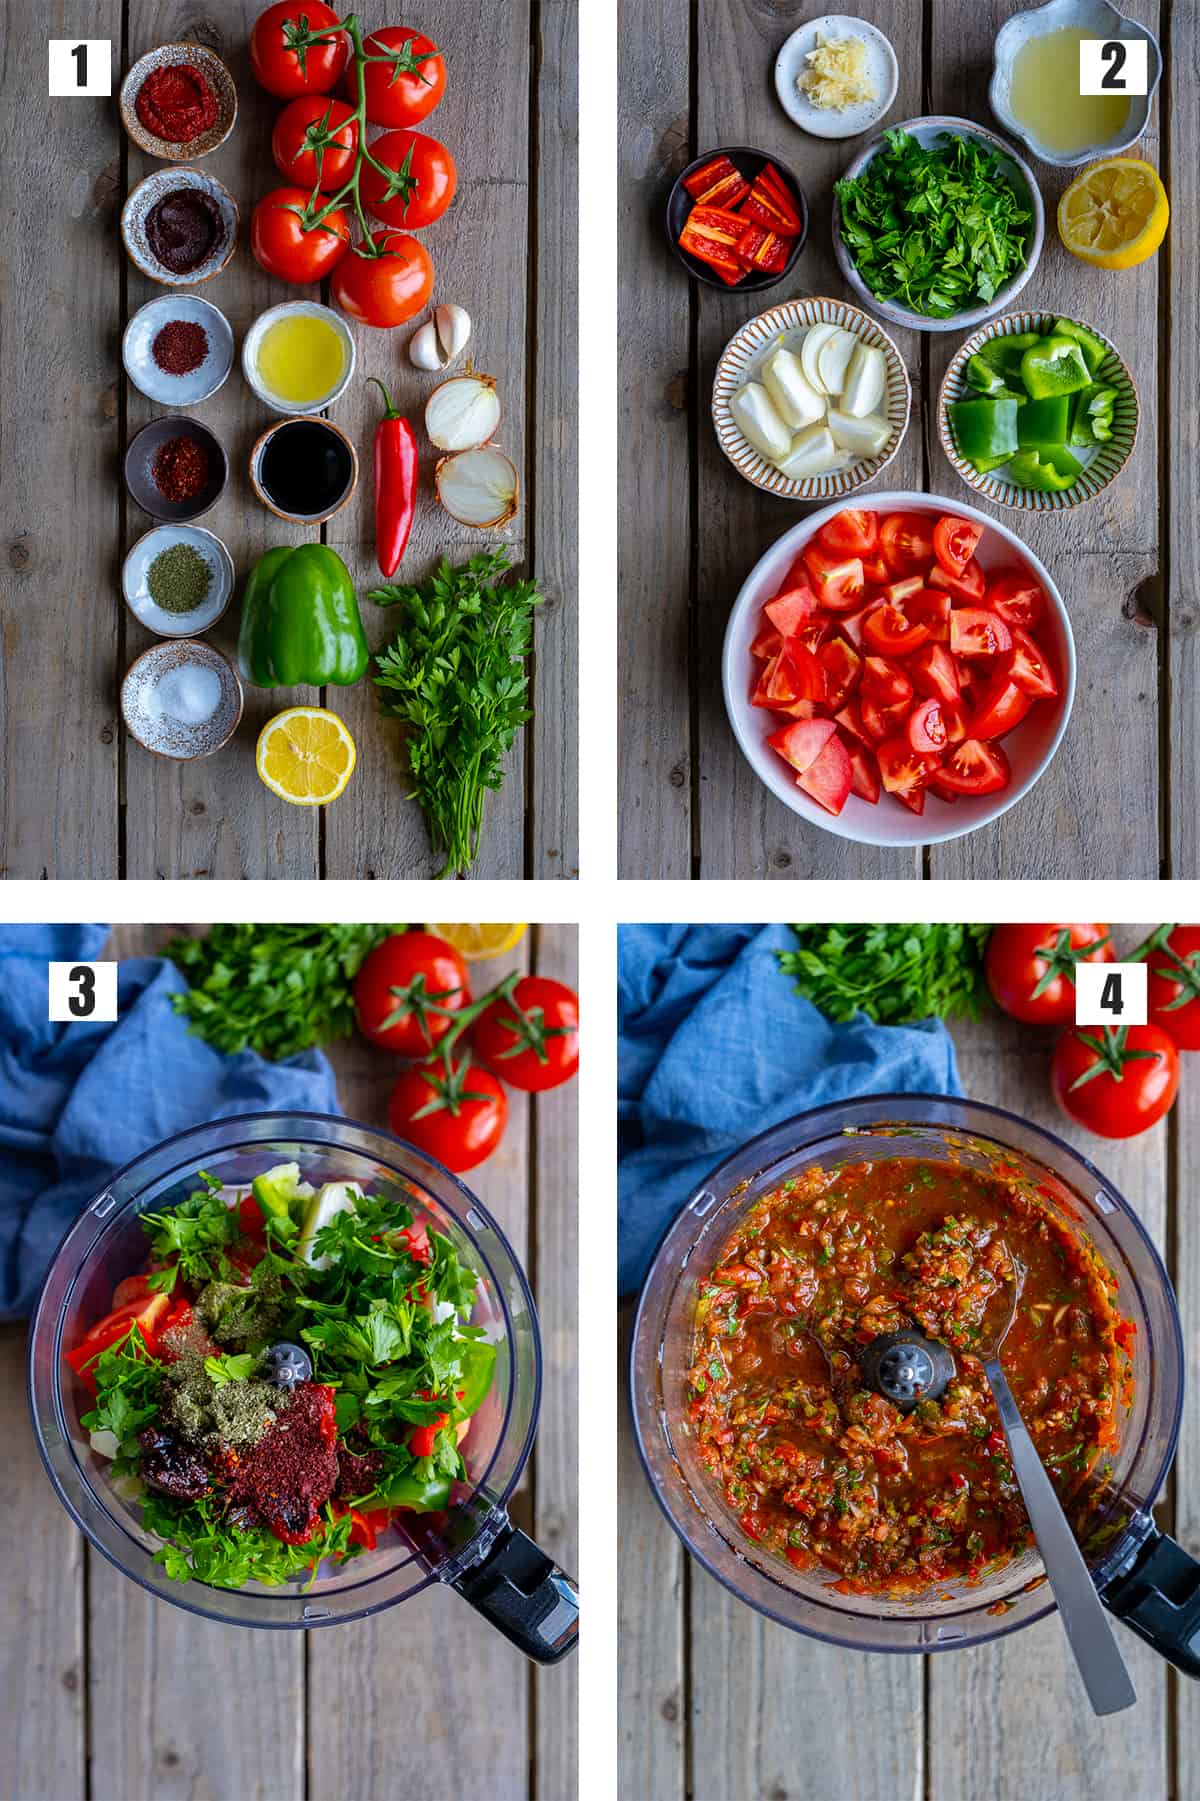 A collage of four pictures showing the ingredients of ezme dip, chopped vegetables in bowls, blending them in a food processor.